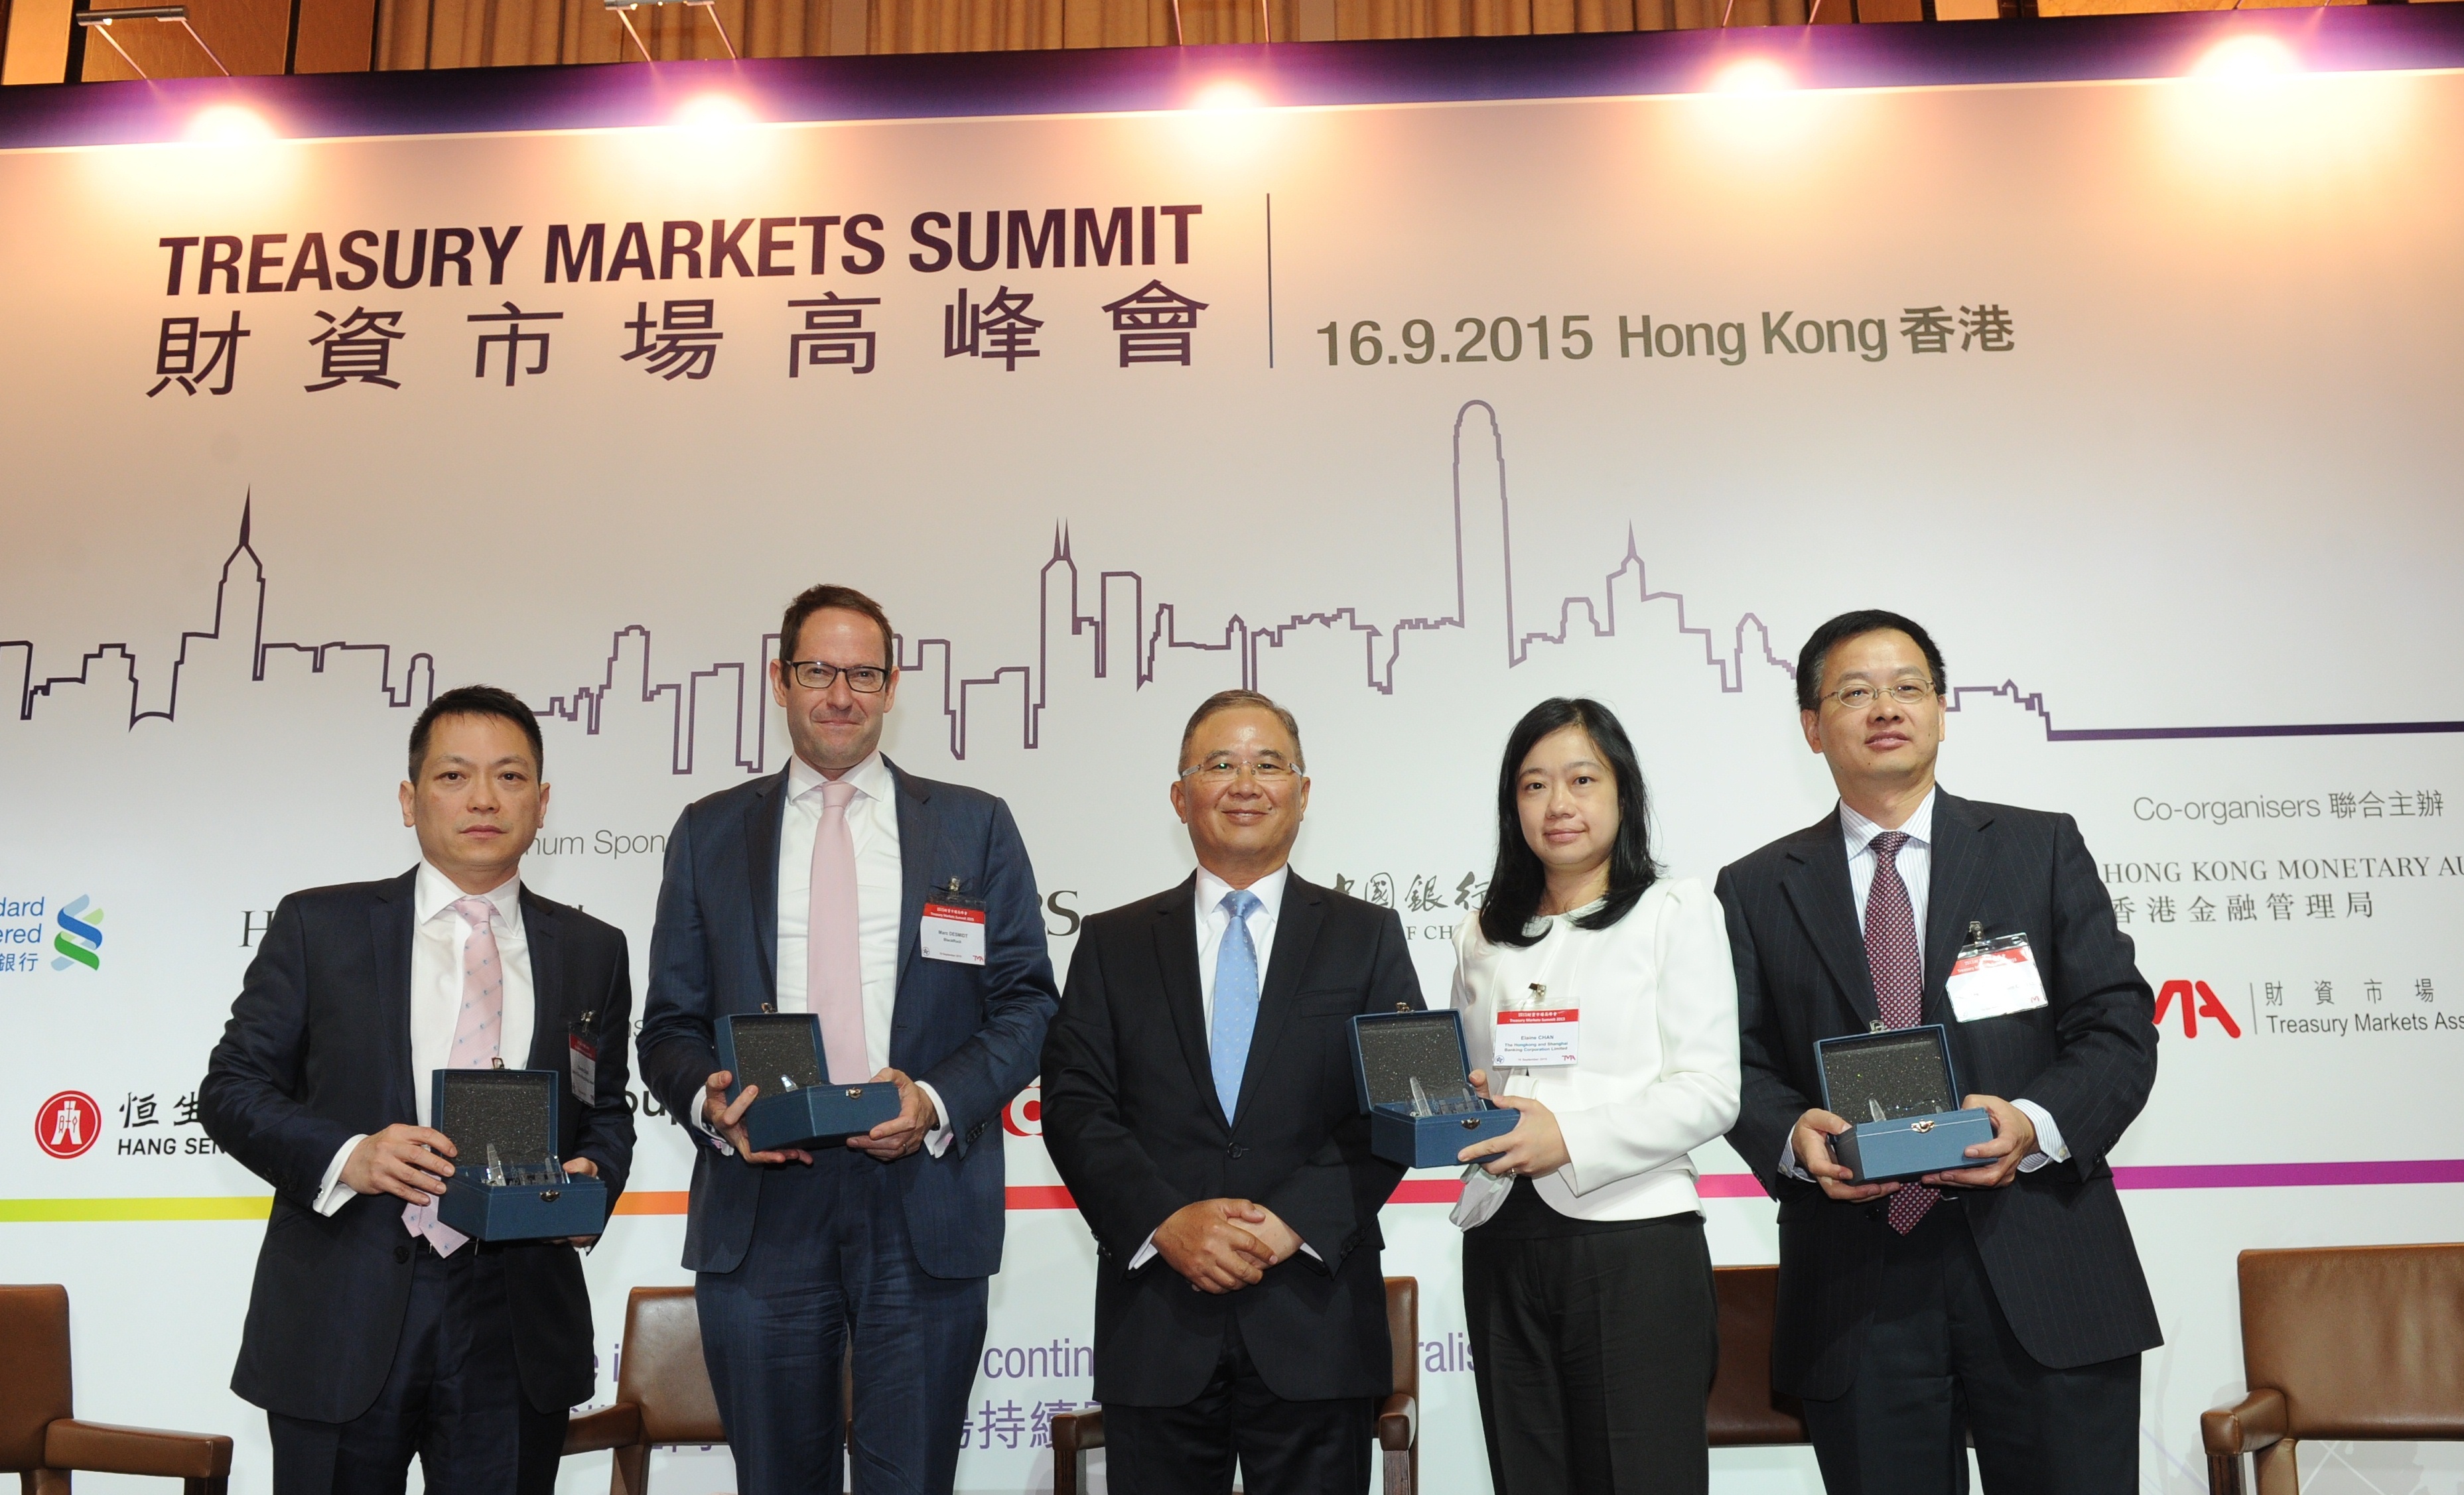 Mr Peter Pang, Deputy Chief Executive of the Hong Kong Monetary Authority (third from left), shares his views on the meaning for the evolution of RMB from a trade currency to an investment currency.  Joining him on the panel discussion are Mr Chordio Chan, General Manager, Head of Investment, Investment Management, Bank of China (Hong Kong) Limited (first from left), Mr Marc Desmidt, Managing Director, Head of Strategic Product Management for Asia Pacific, BlackRock (second from left), Ms Elaine Chan, Managing Director, Head of HKD & CNY Bond Trading, Asia-Pacific, The Hongkong and Shanghai Banking Corporation Limited (second from right), and Mr Frank Zhang, Deputy Chief Executive Officer, China Asset Management Co., Limited and Chief Executive Officer, China Asset Management (Hong Kong) Limited (first from right).